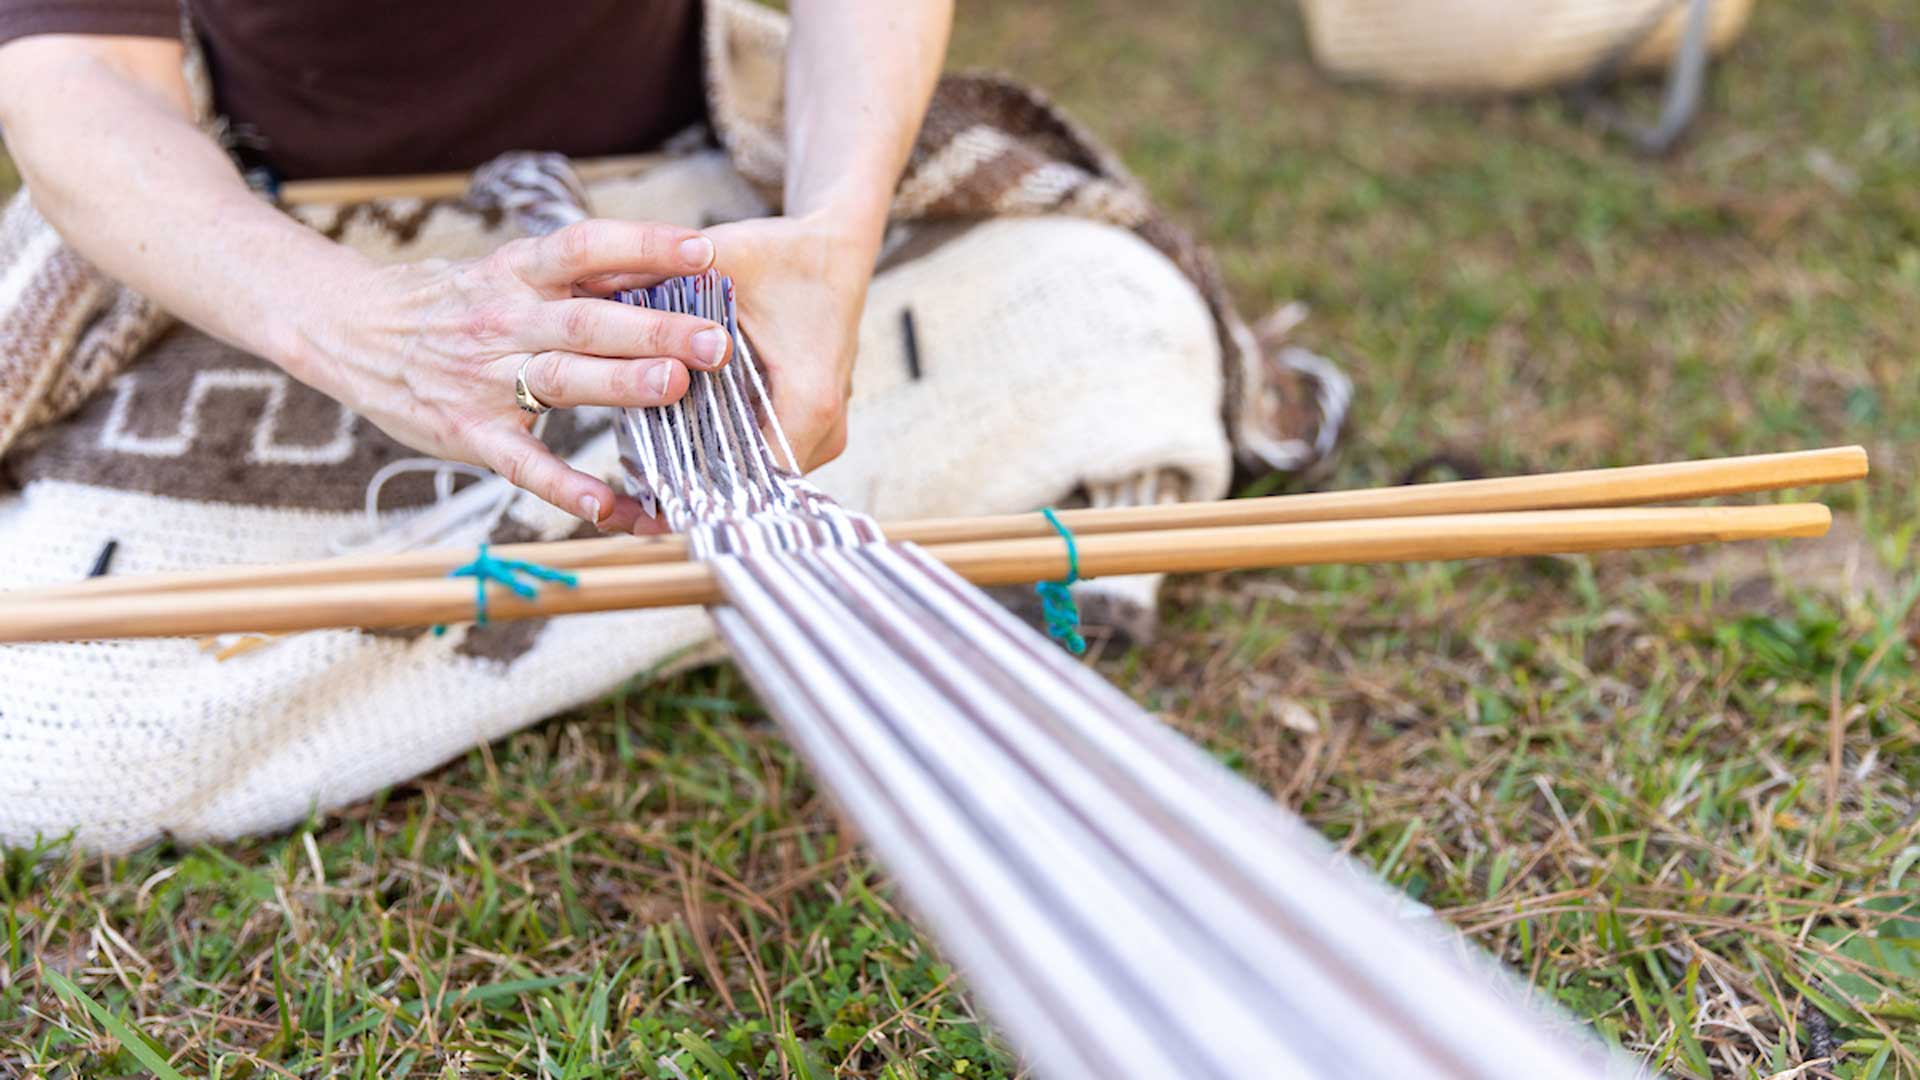 A woman is making a textile using traditional Native American tools.